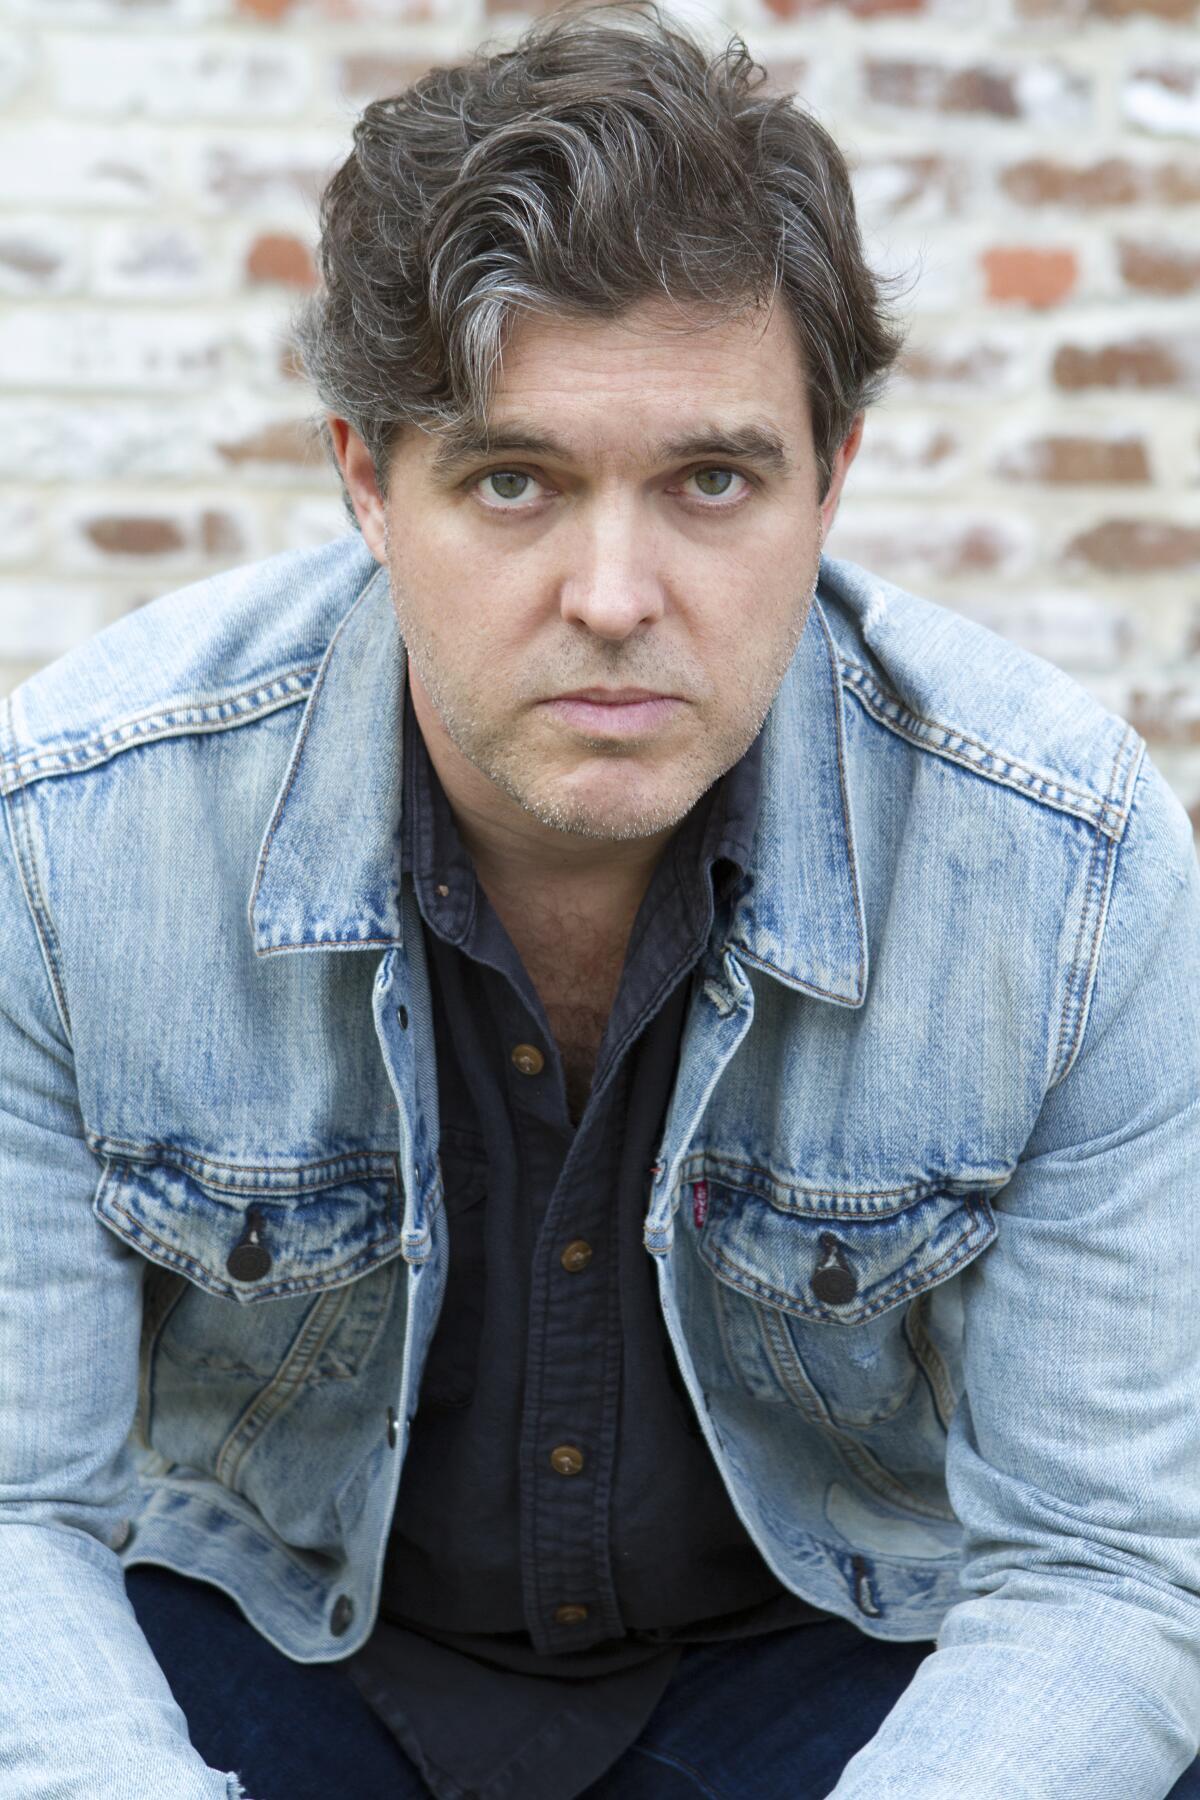 Man with wavy salt-and-pepper hair in blue shirt and denim jacket, seated in front of a brick wall.